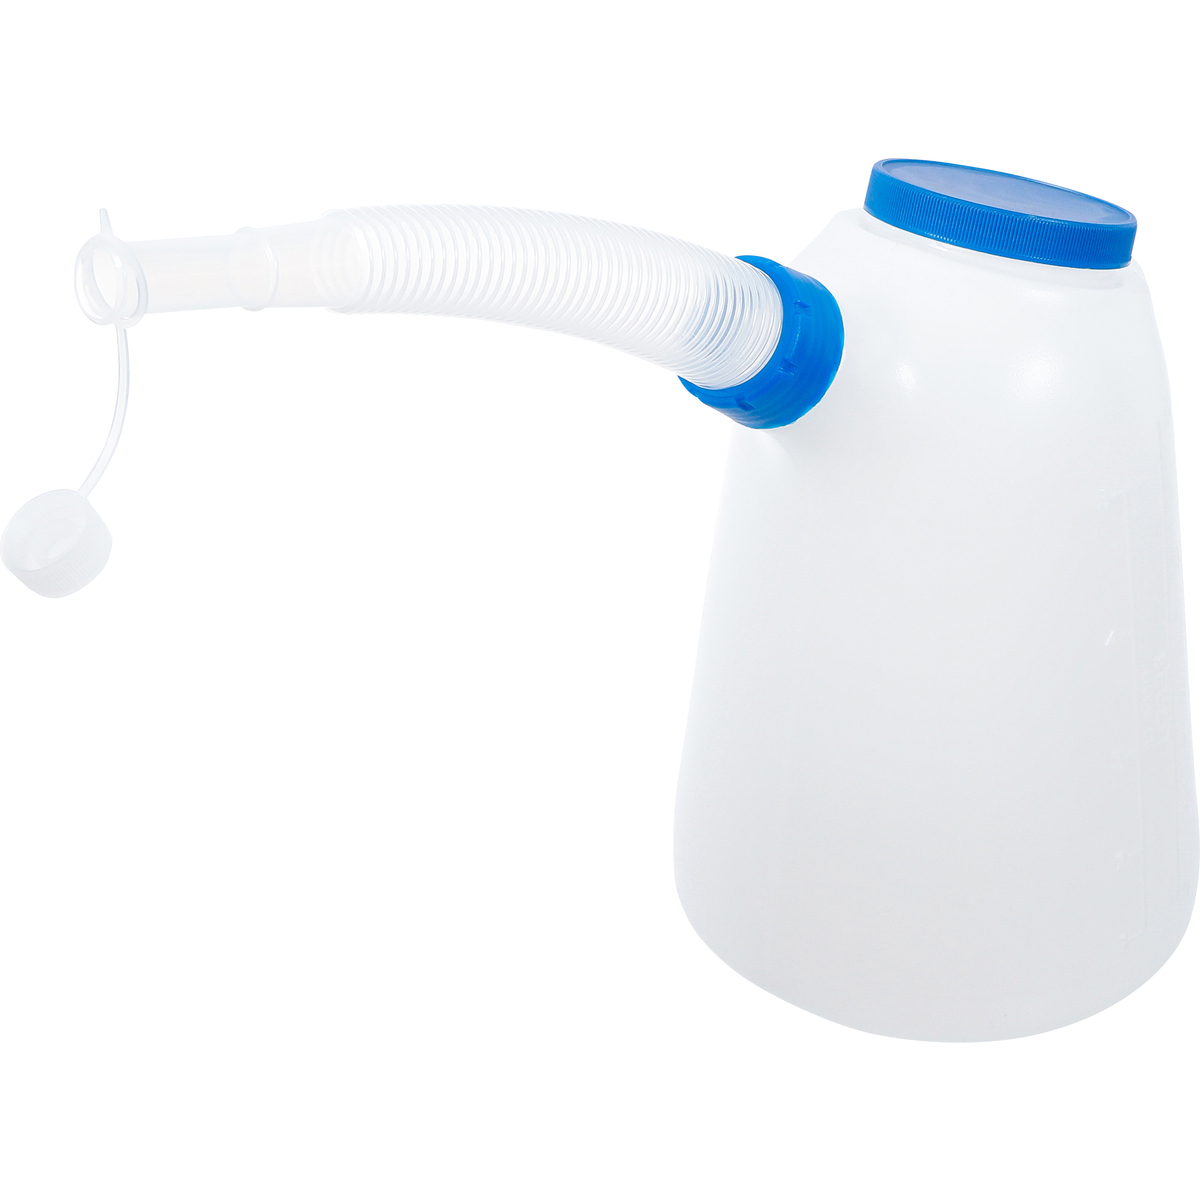 Fluid Flask with flexible spout and lid